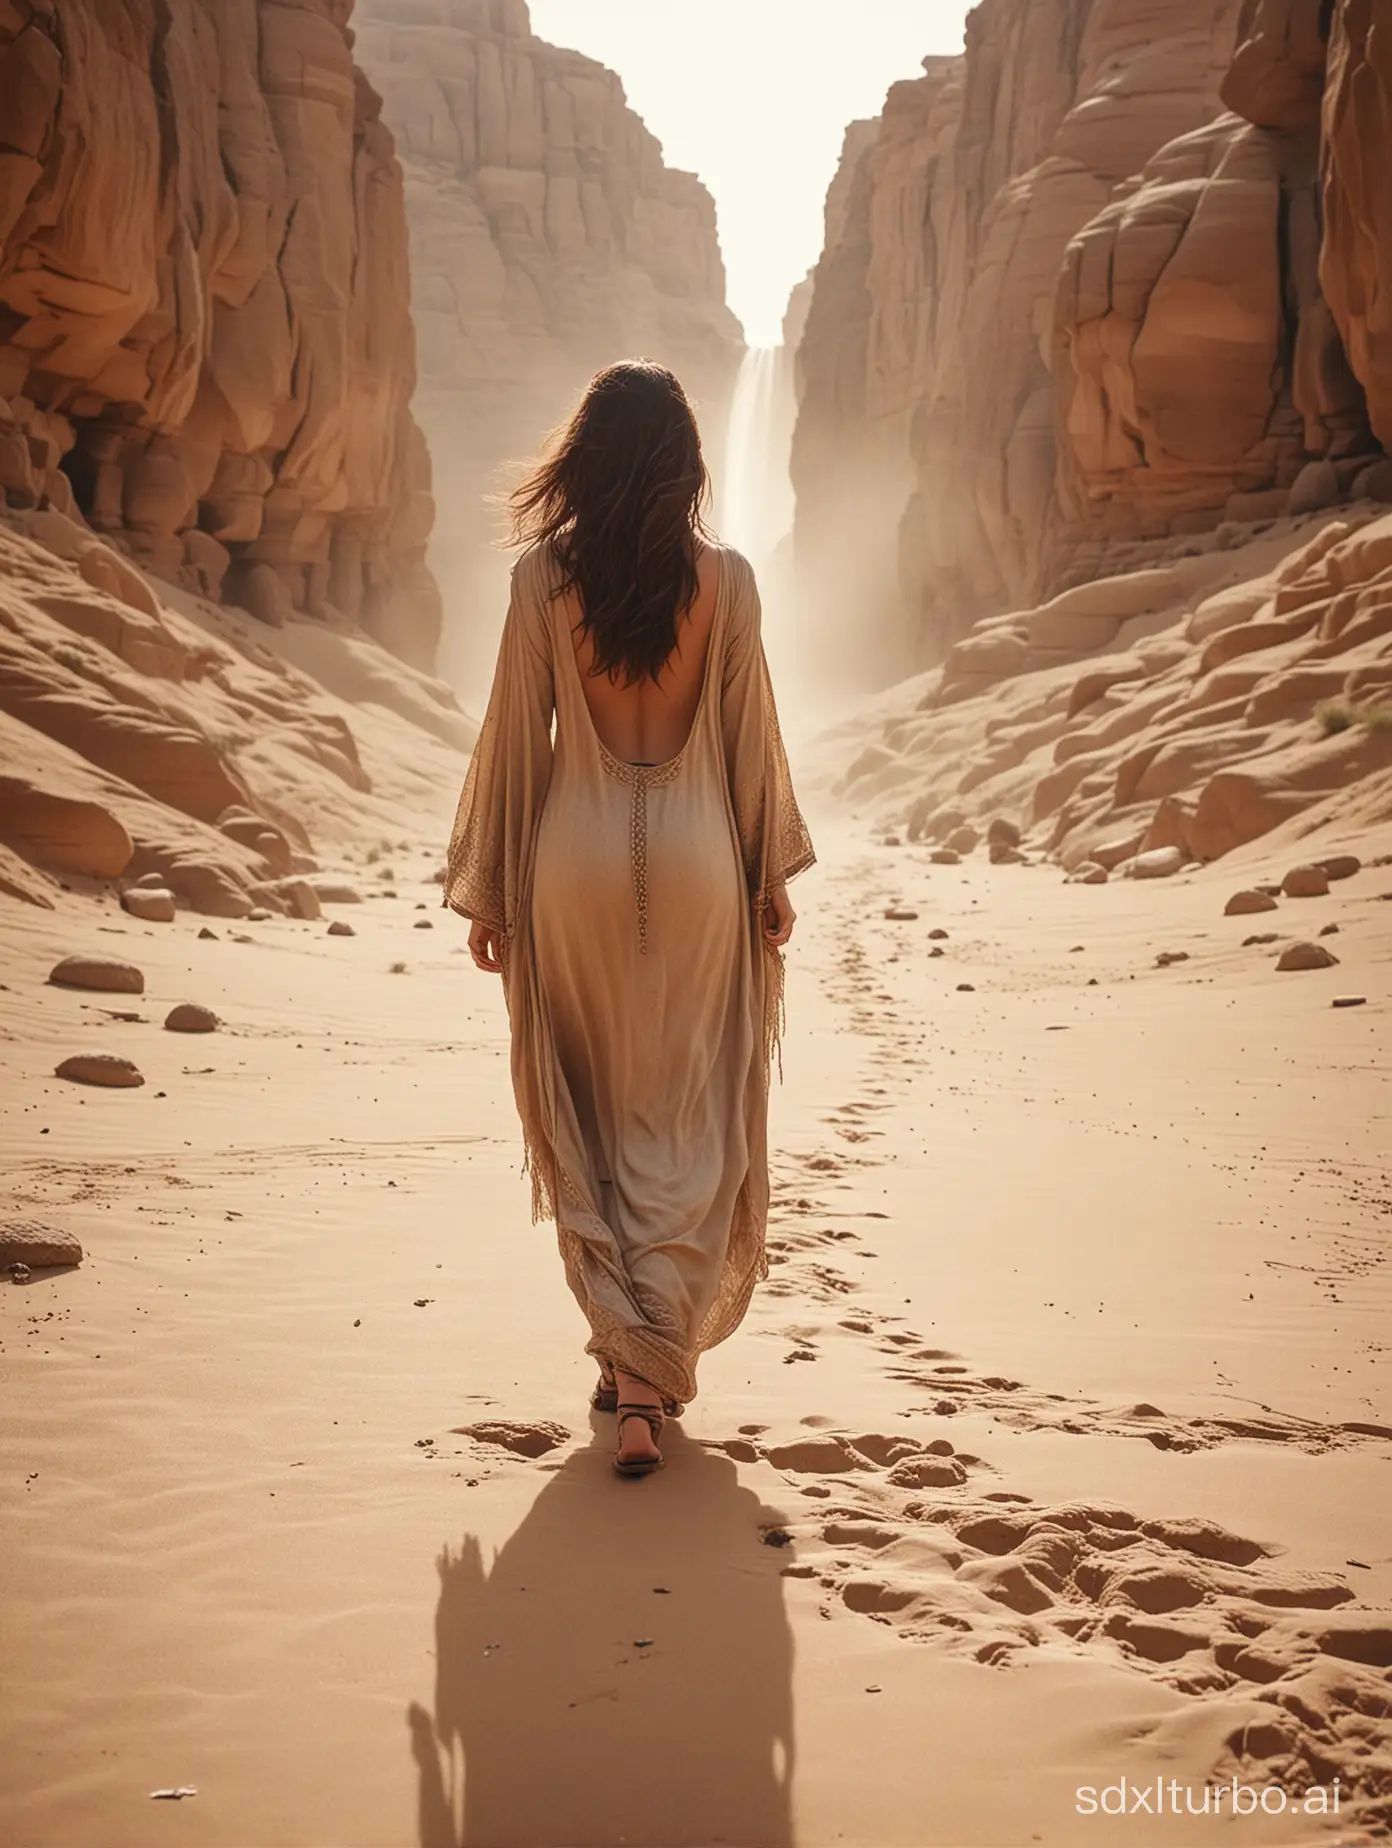 Professional back photo. Sharp focus. Film grain. Vintage Bokeh. Soft lighting. Grainy low contrast flat look of the photo. Vintage aesthetics. From the back. Full body ultra-wide angle of young Persian female living in ancient times walking away from the viewer in a very far distance from the viewer. Extremely huge tall waterfall in the desert surrounded by huge sand dunes. Extremely revealing Persian clothing. Sweating skin. Camels. From behind. Far-back shot. Grainy vintage look of the photo.